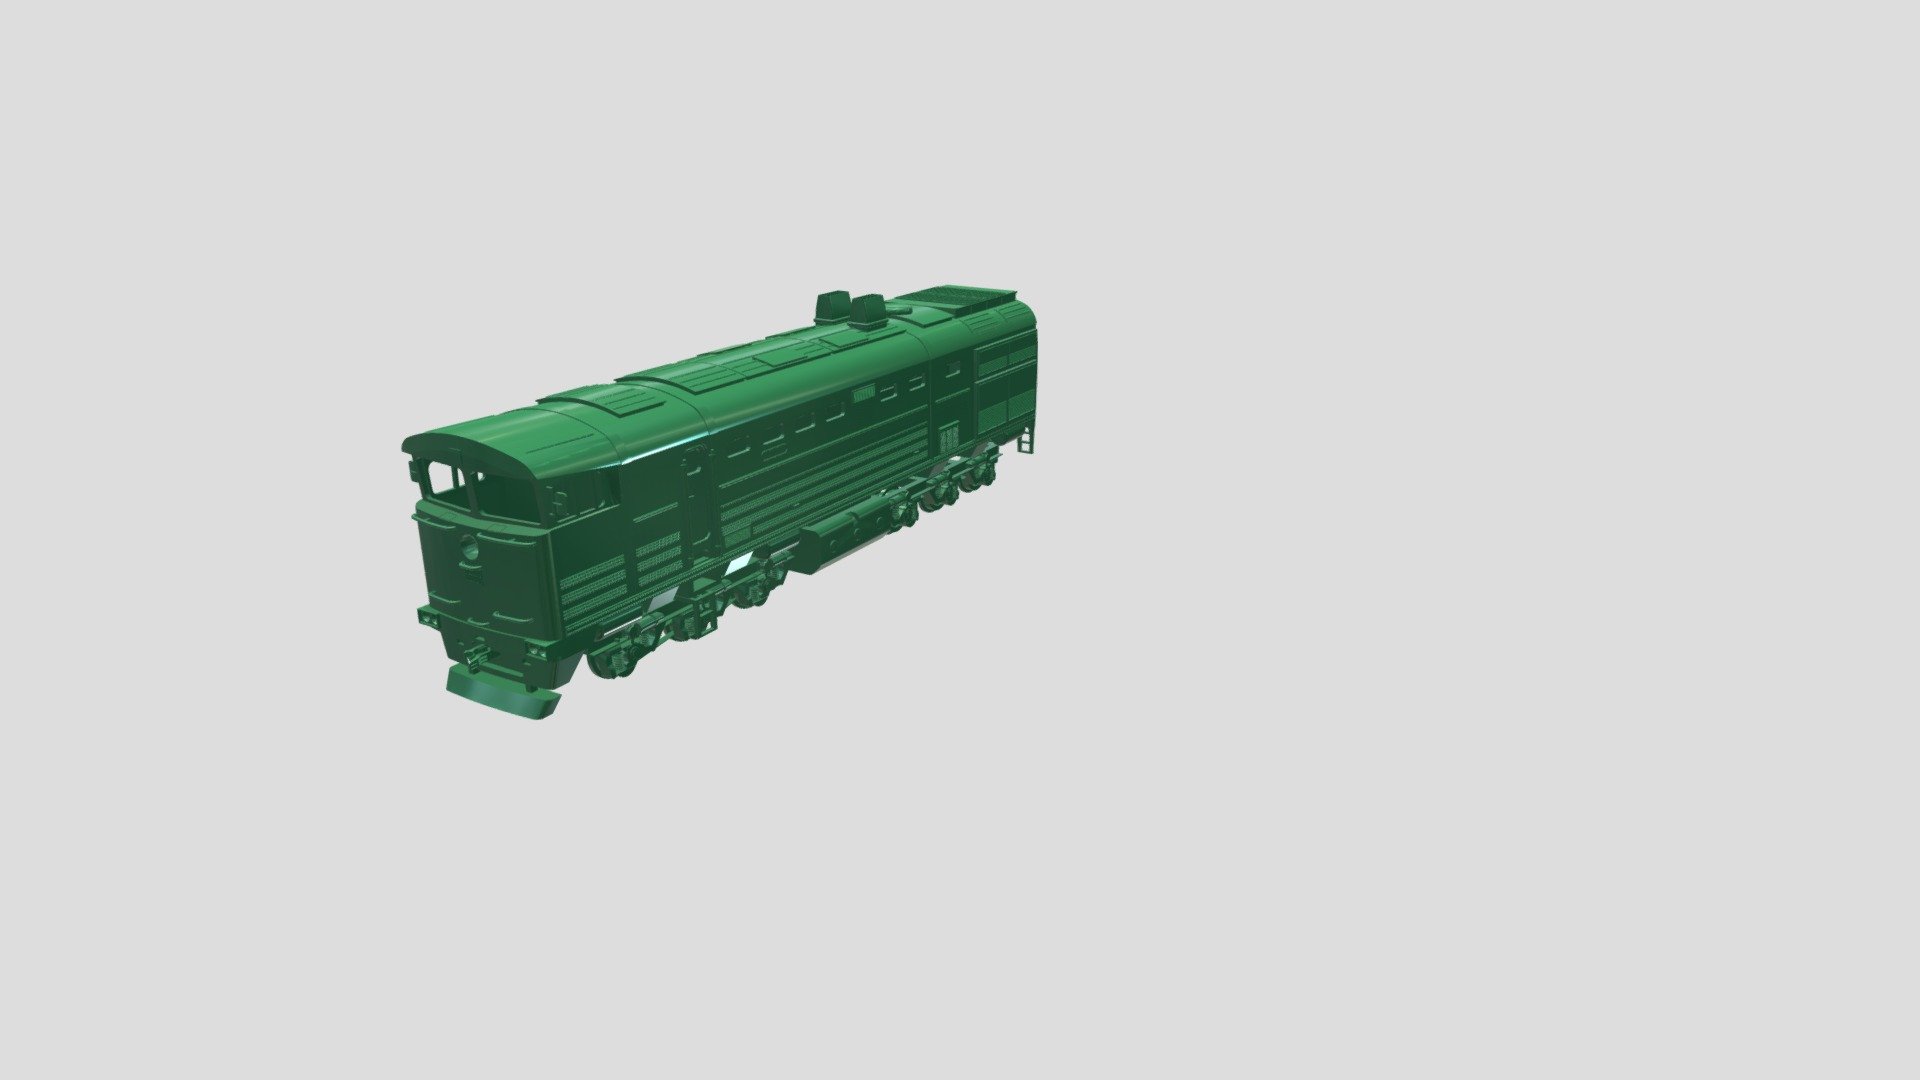 Lokomotive for 3D Print
You can   write to me and i give you individual components for assembly
s.semirekov@gmail.com - Locomotive - 3D model by SammyRekov 3d model